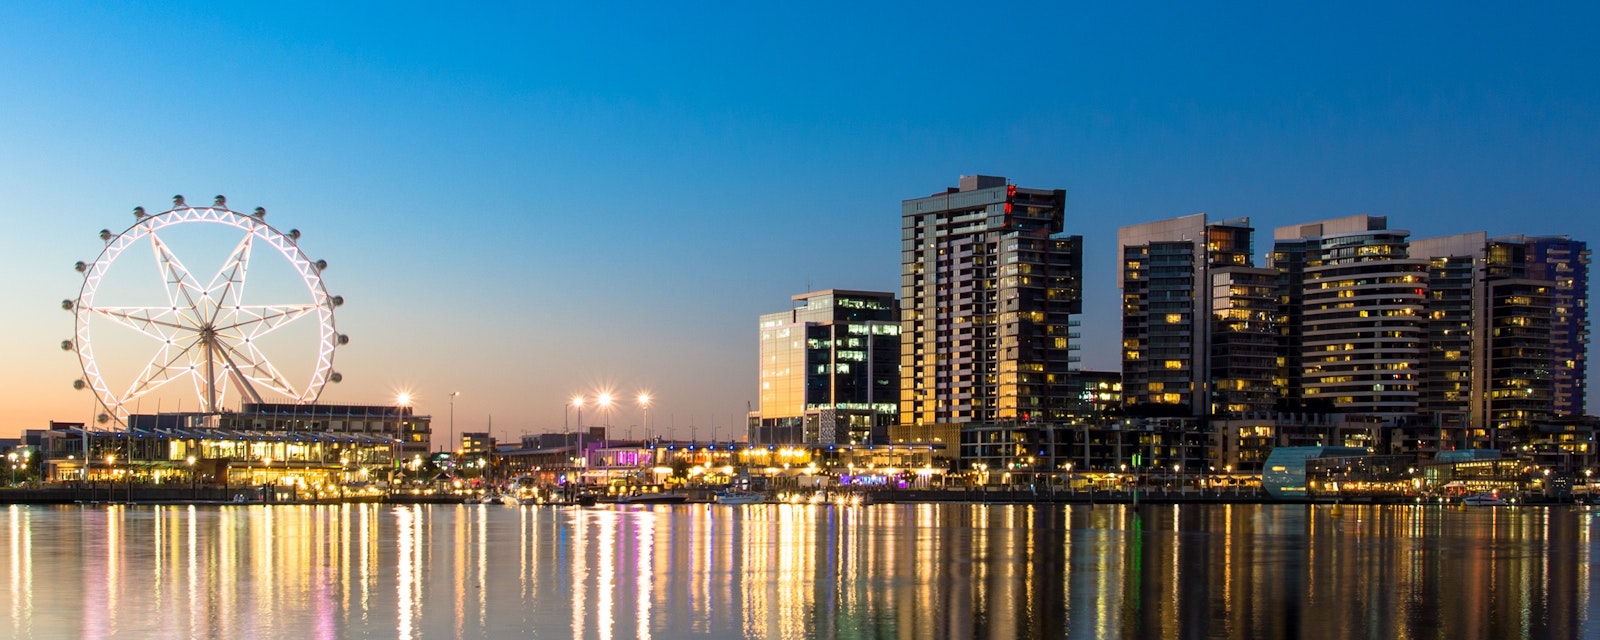 The,Docklands,Waterfront,Of,Melbourne,,Australia,At,Night